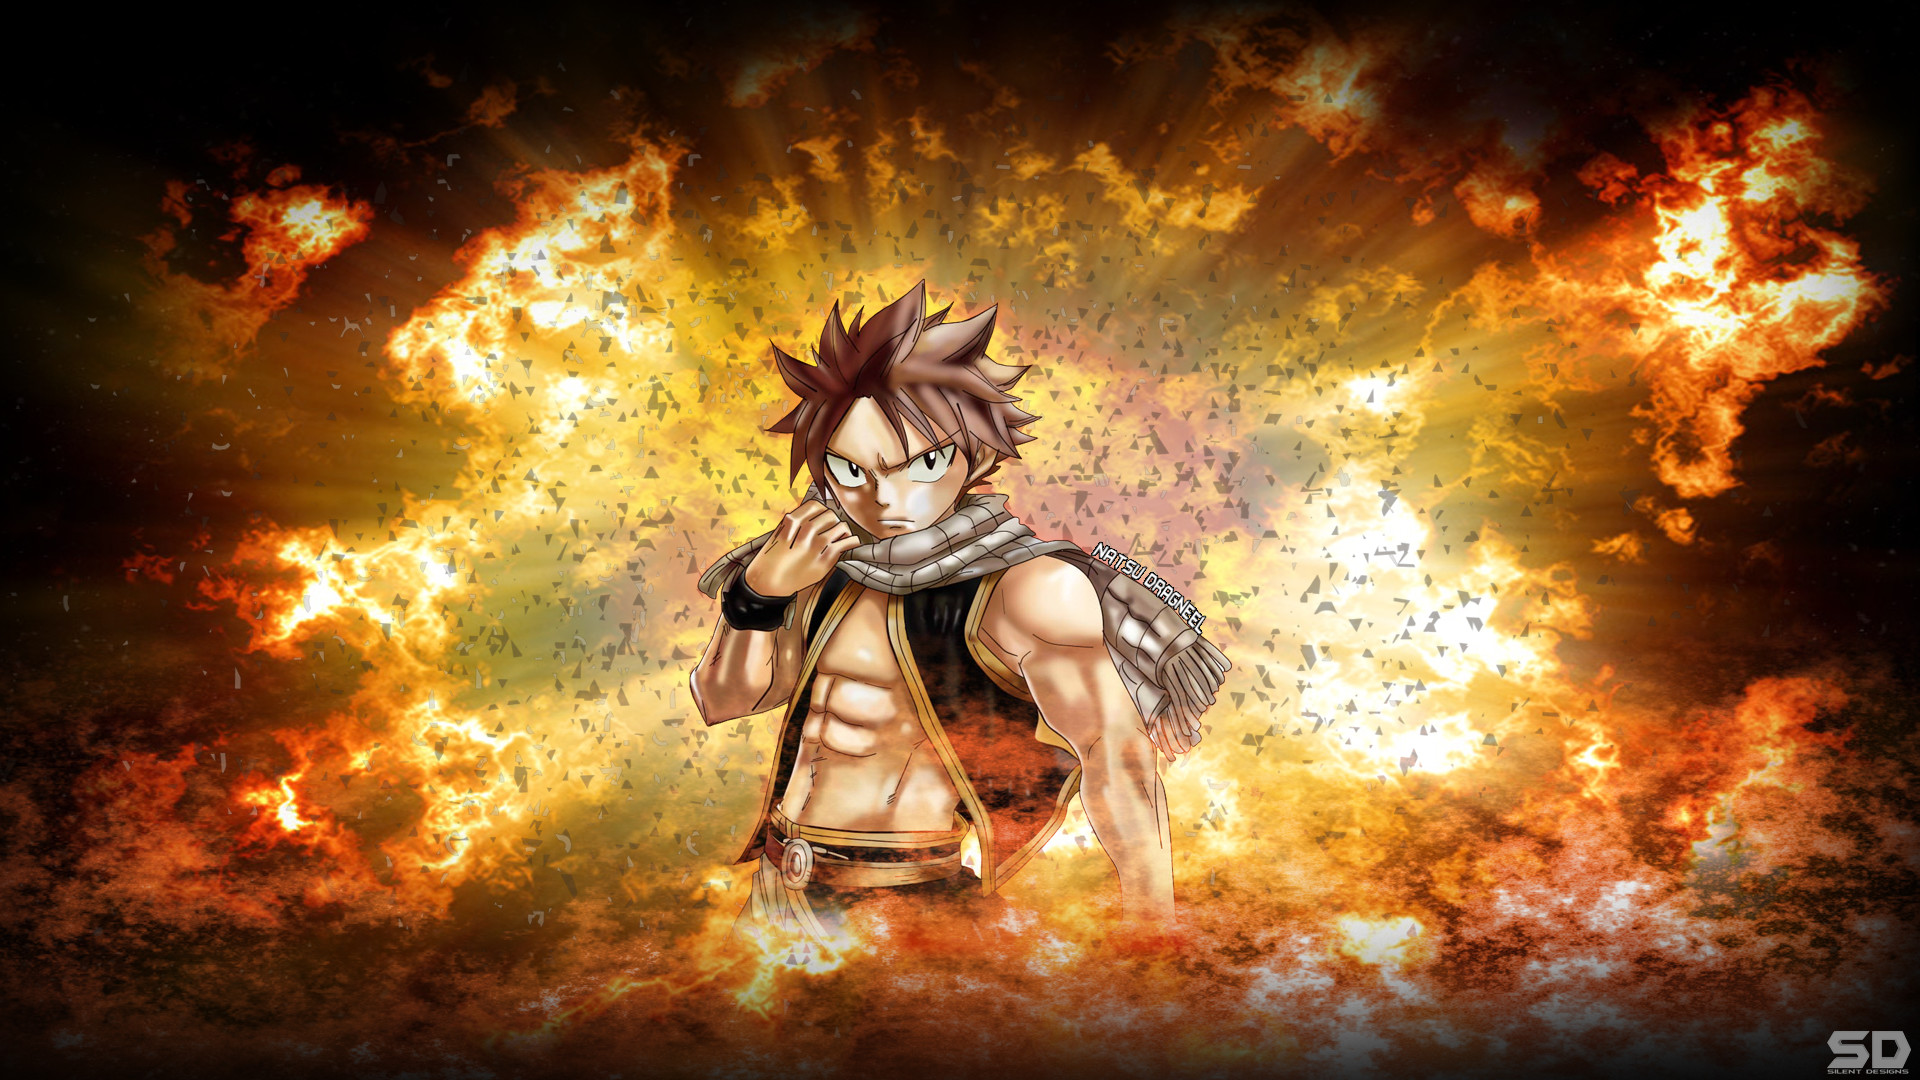 1920x1080 ... Fairy Tail Wallpaper (Natsu Dragneel) by Silent--Designs